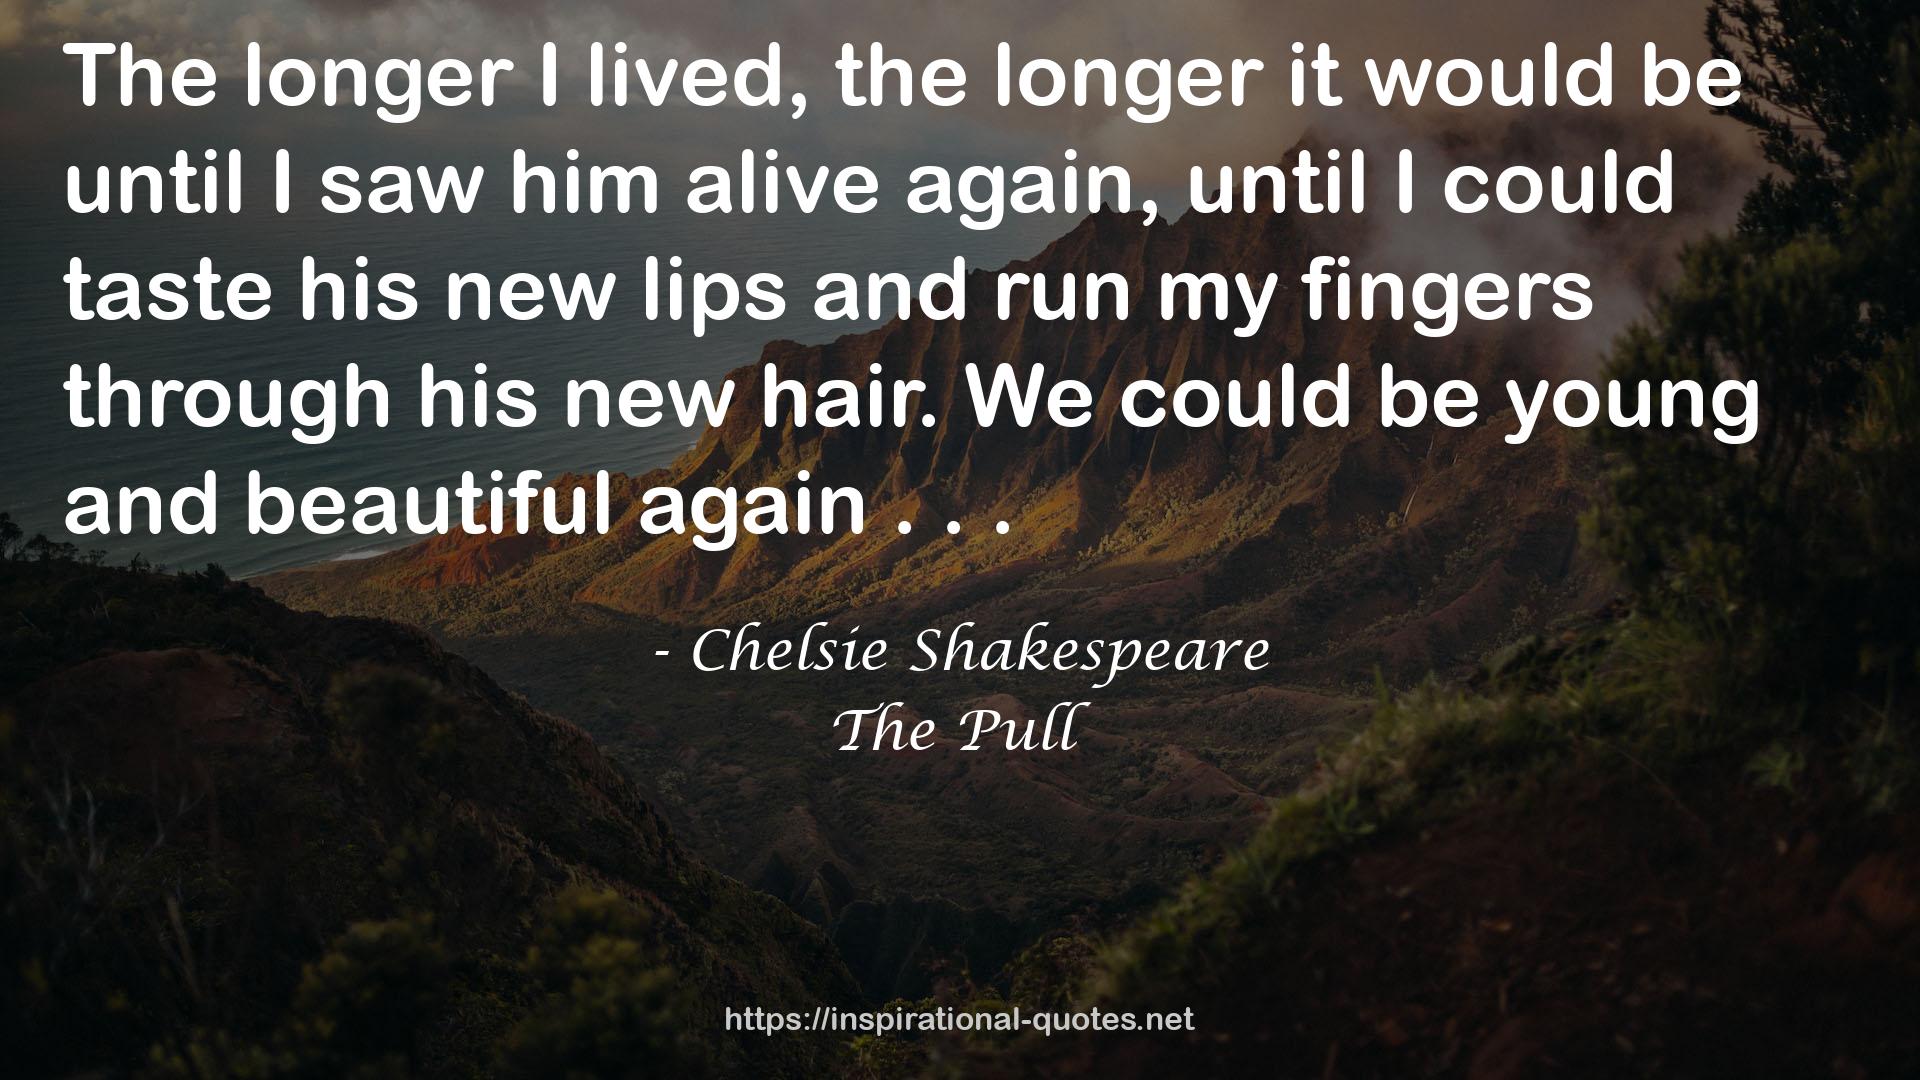 Chelsie Shakespeare QUOTES